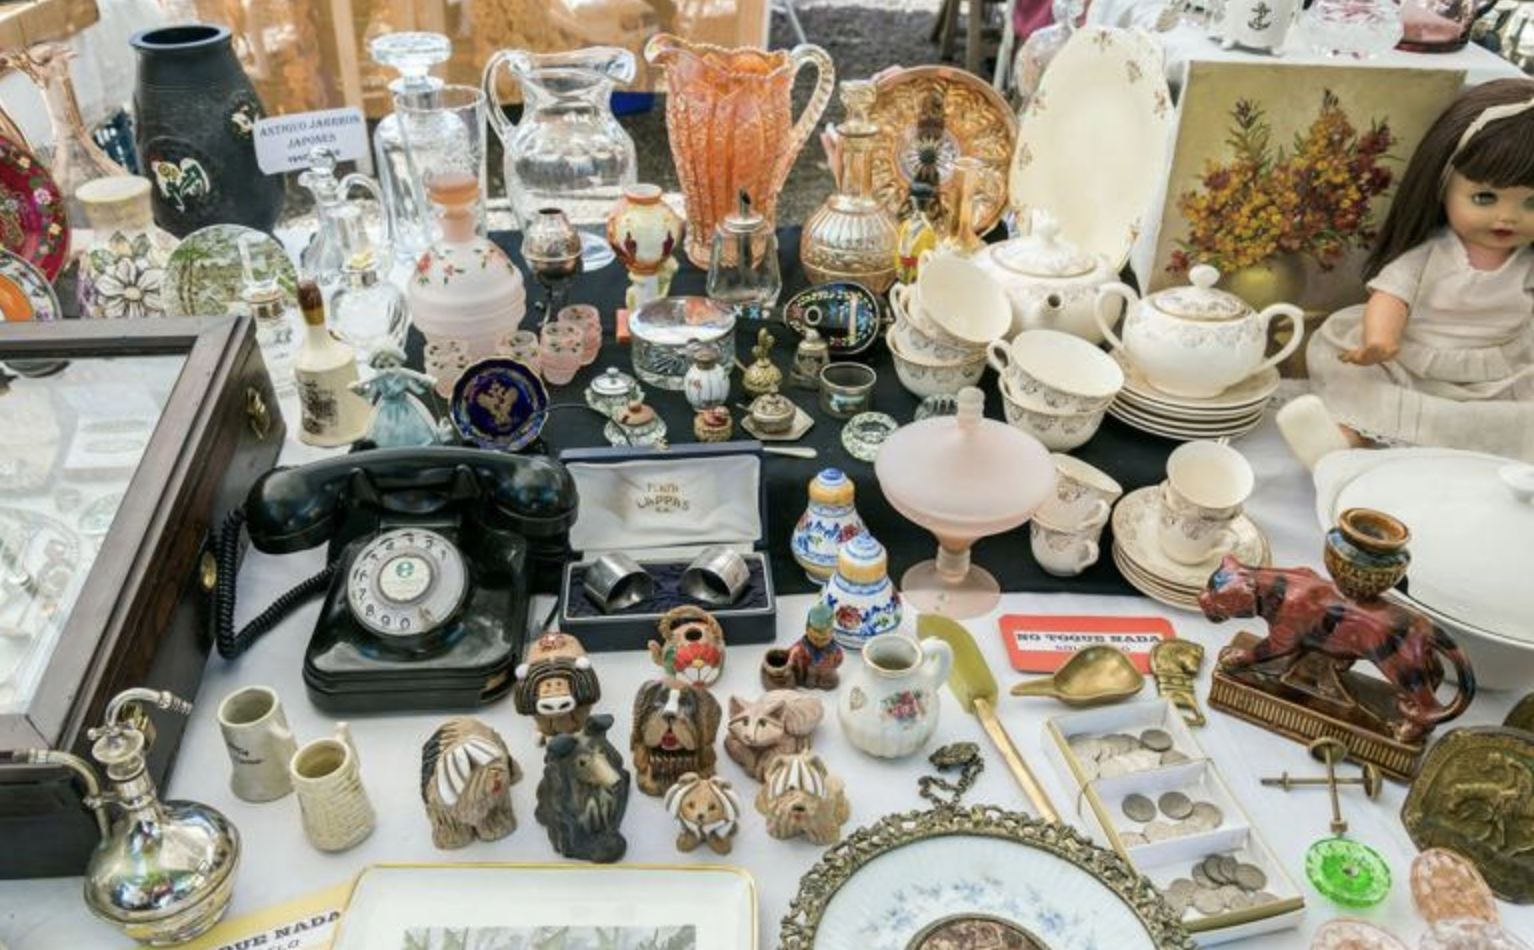 Table of vases, glass figurines, and antique knick knacks